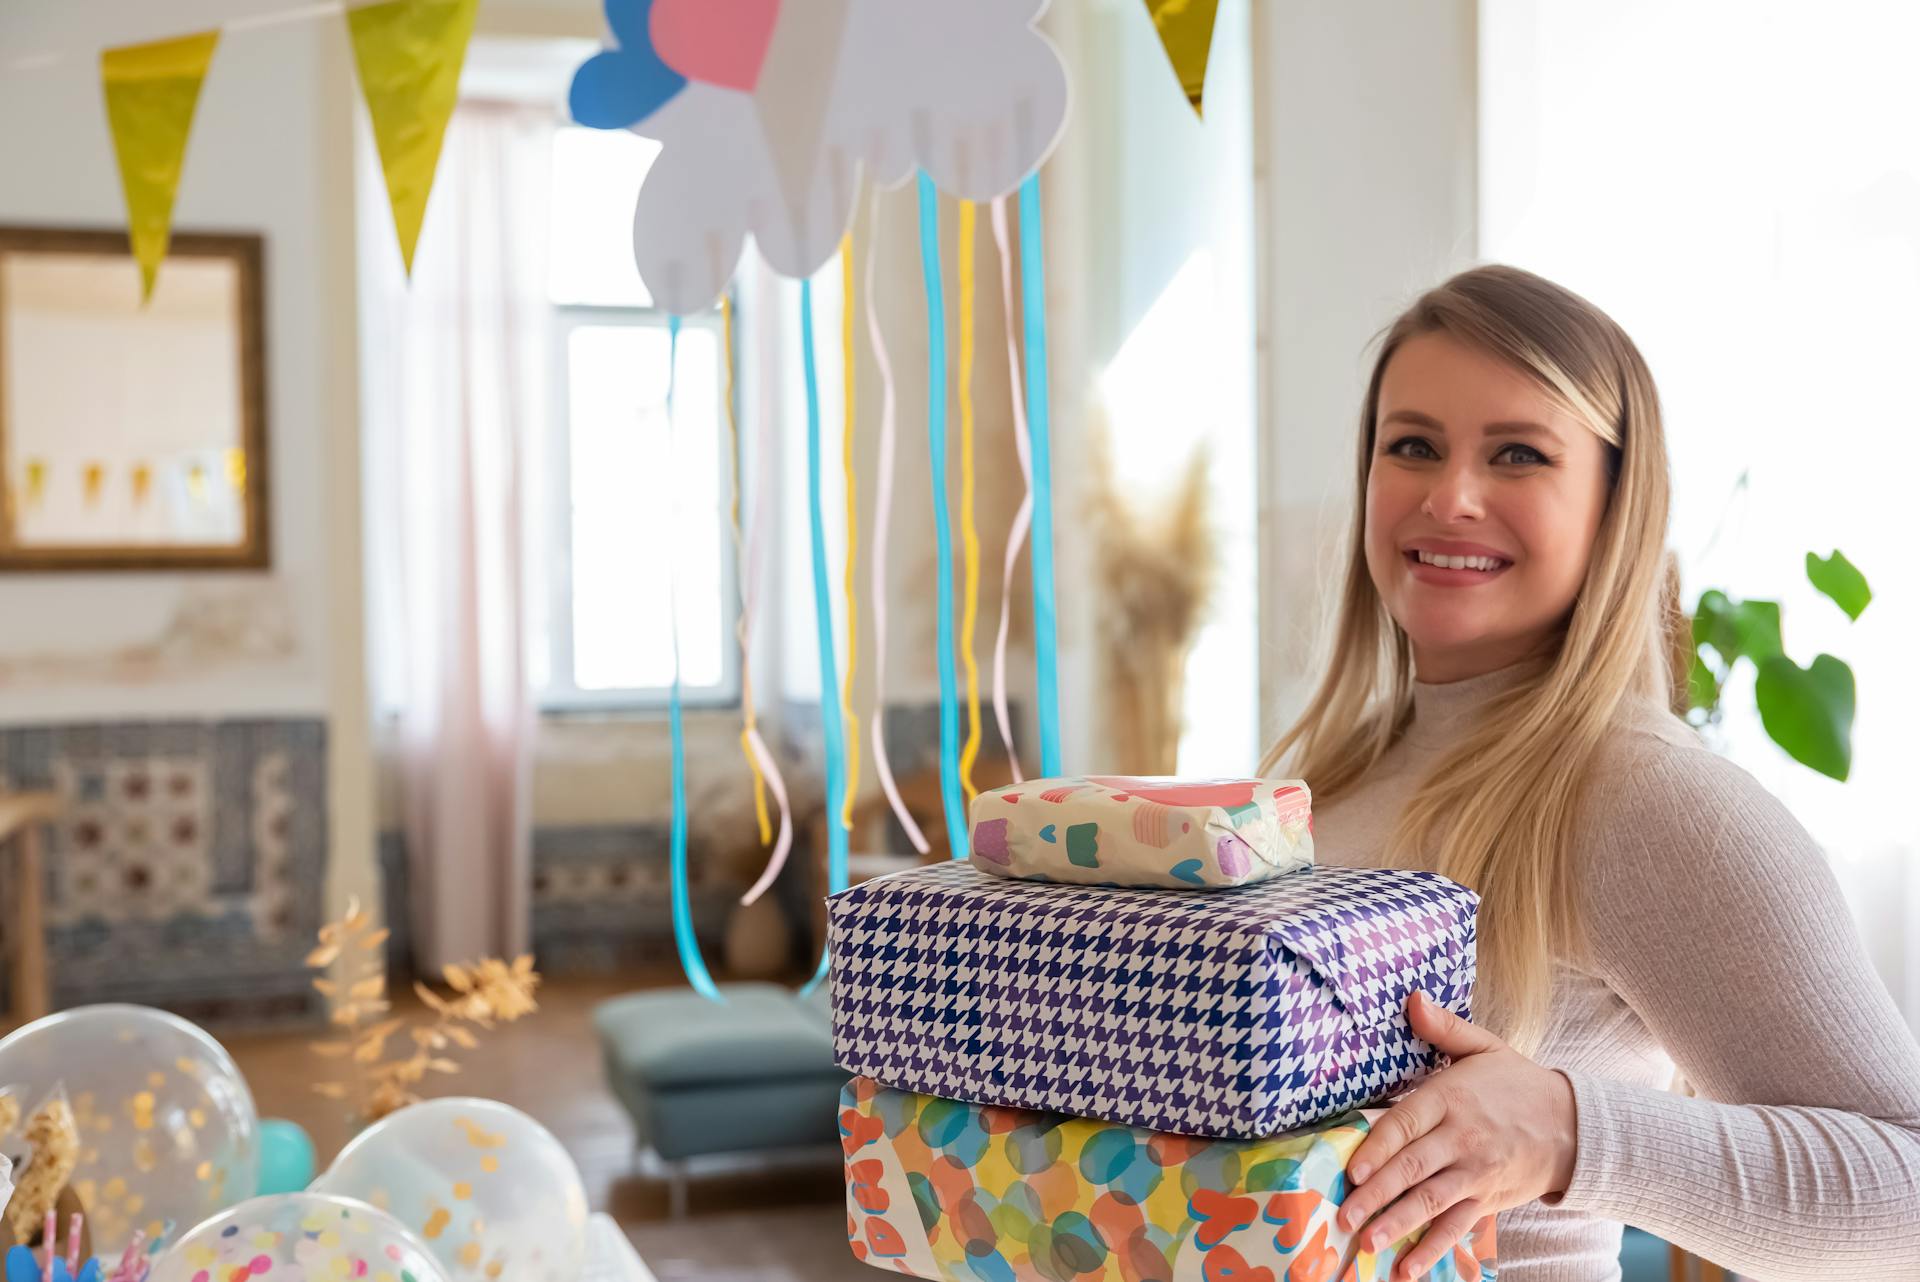 A woman holding a stack of gifts during a baby shower | Source: Pexels